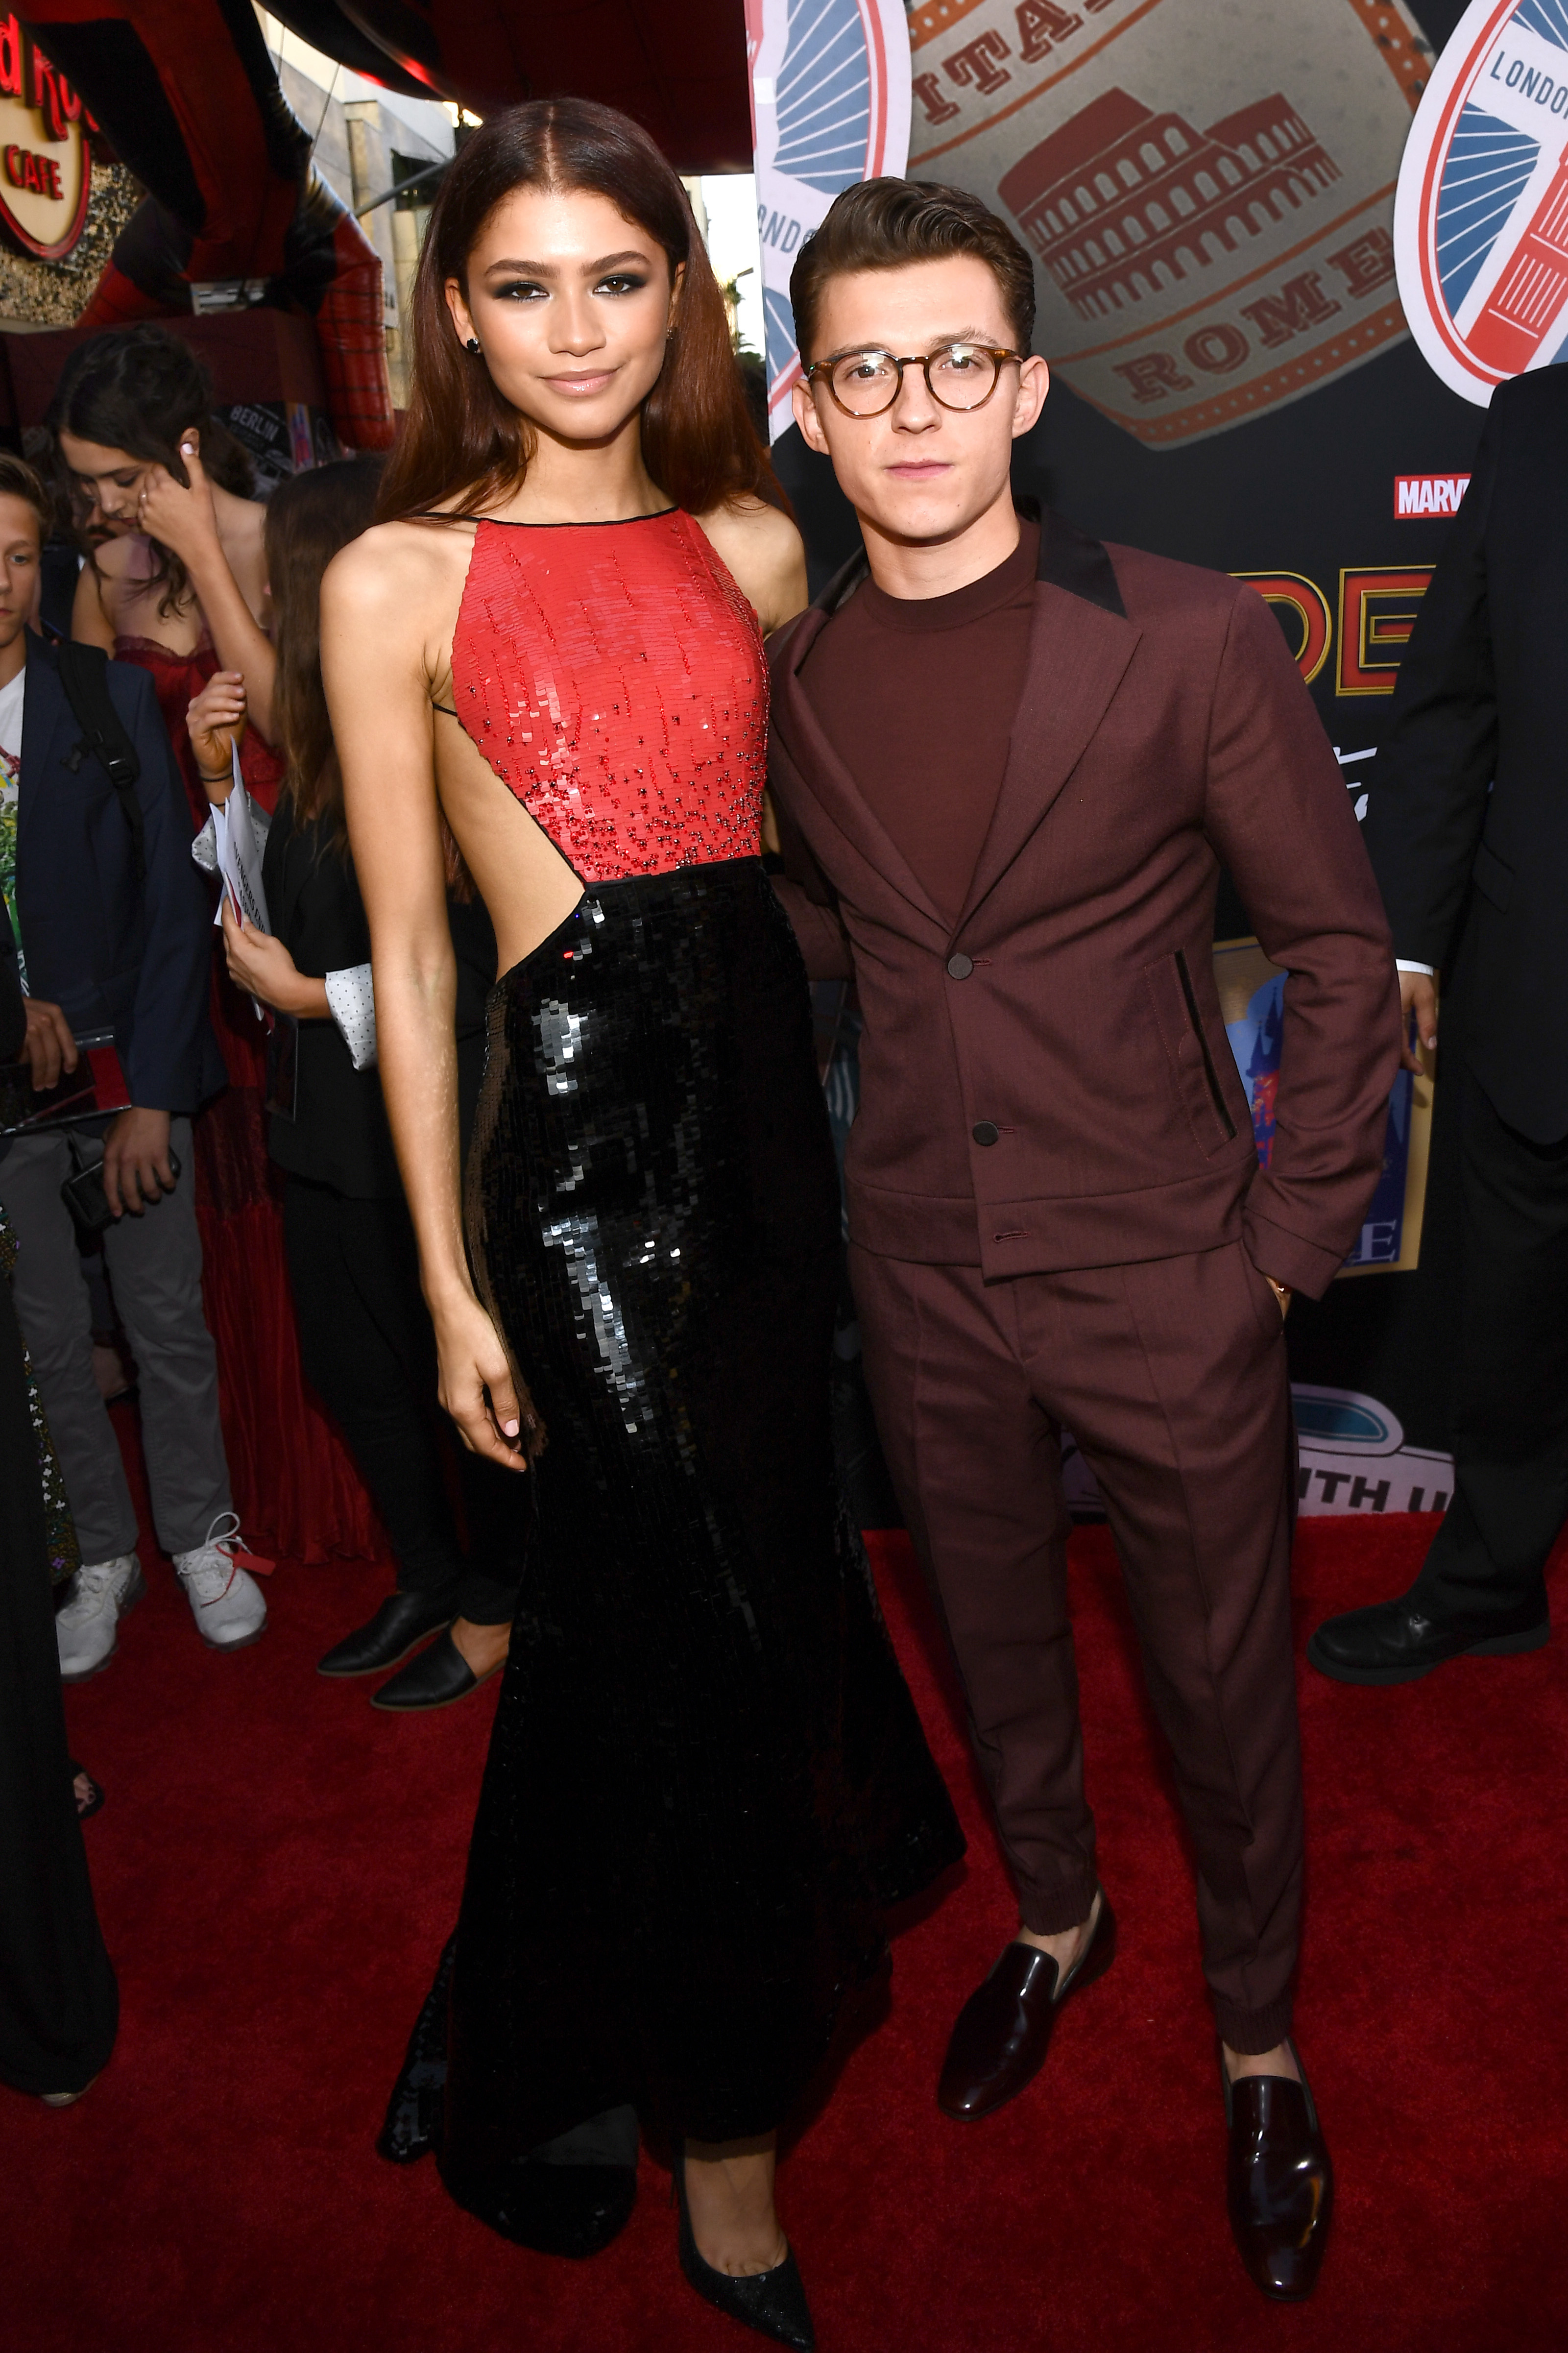 Zendaya & Tom Holland Are a Modern Day Hollywood Power Couple